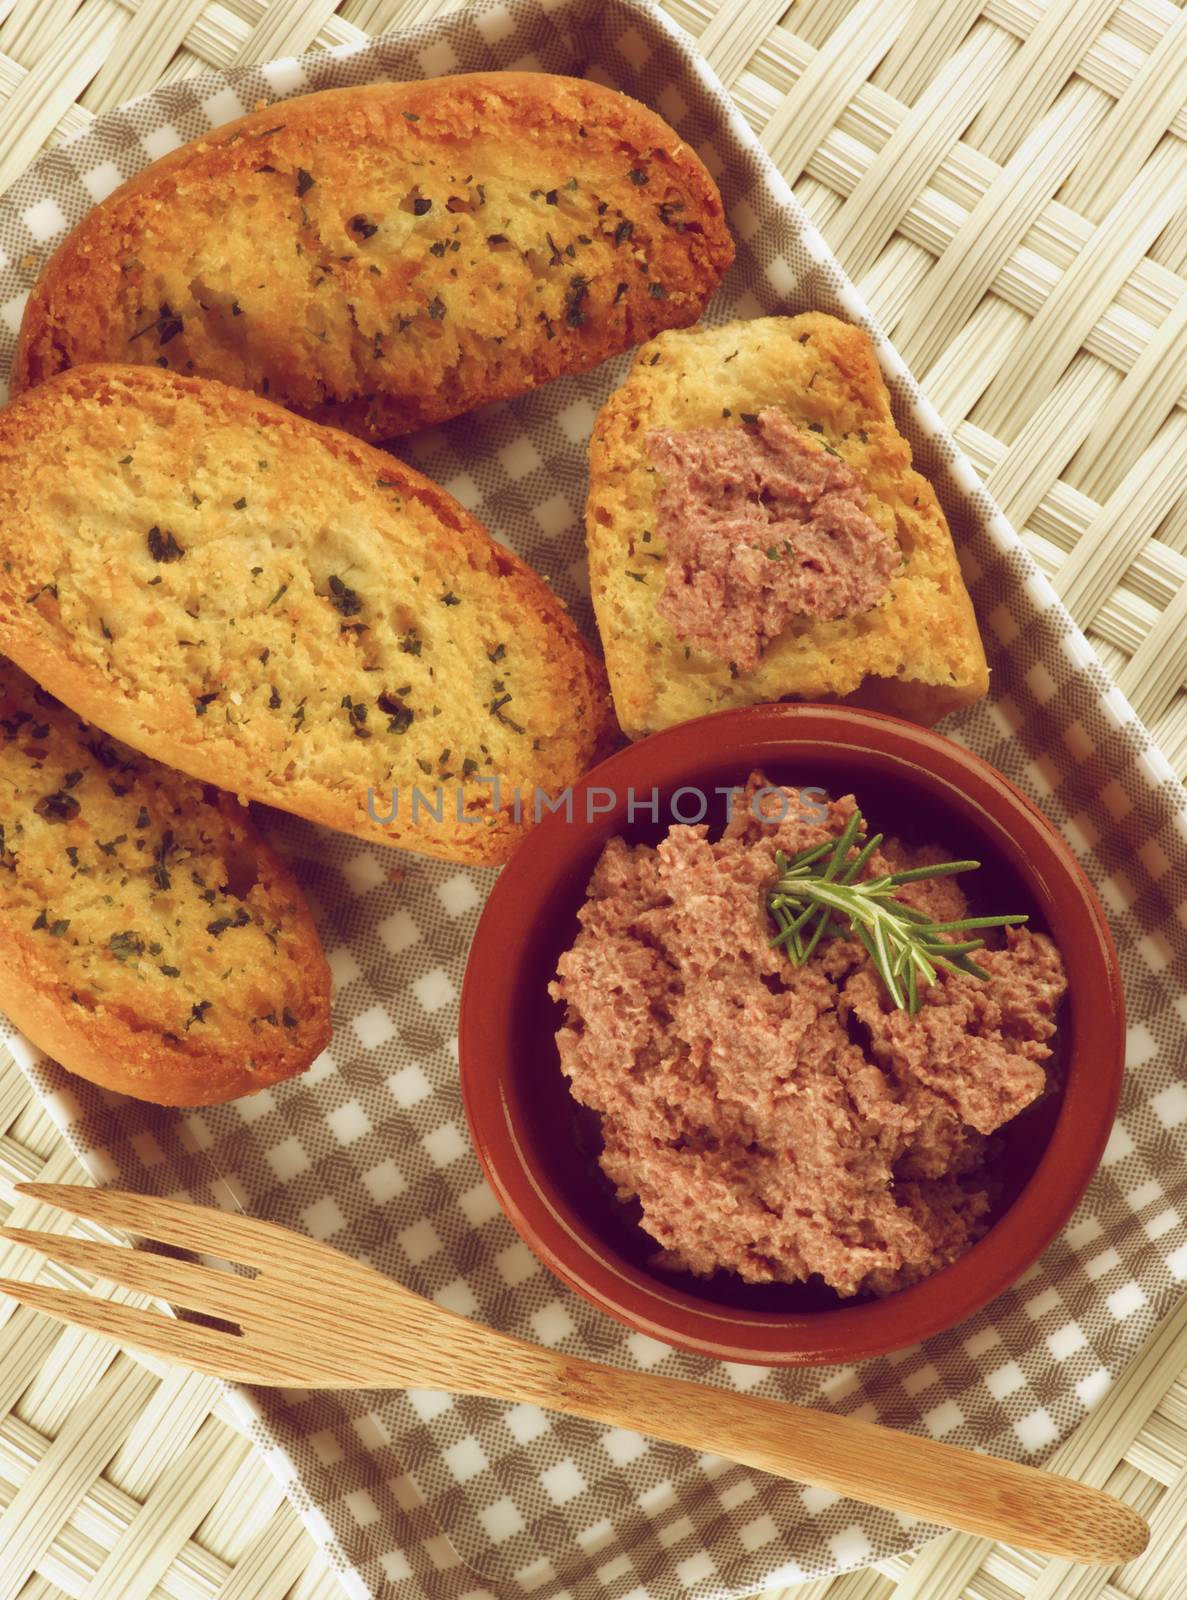 Delicious Homemade Meat Pate with Crispy Herbs Bread in Checkered Tray with Wooden Fork closeup on Wicker background. Retro Styled